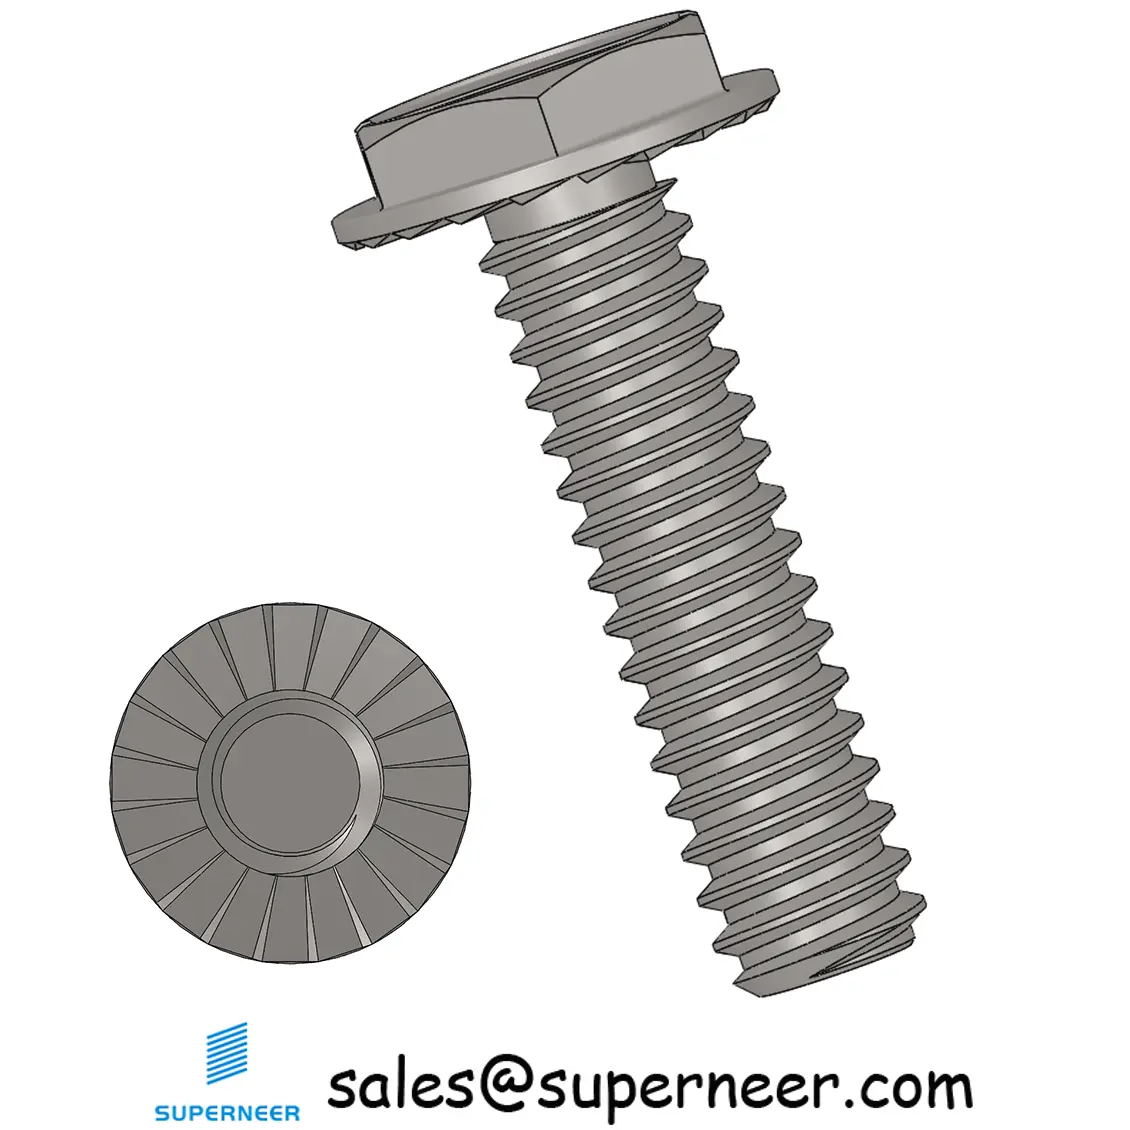 4-40 x 7/16“ Indented Hex Washer Serrated Head Slotted Machine Screw SUS304 Stainless Steel Inox